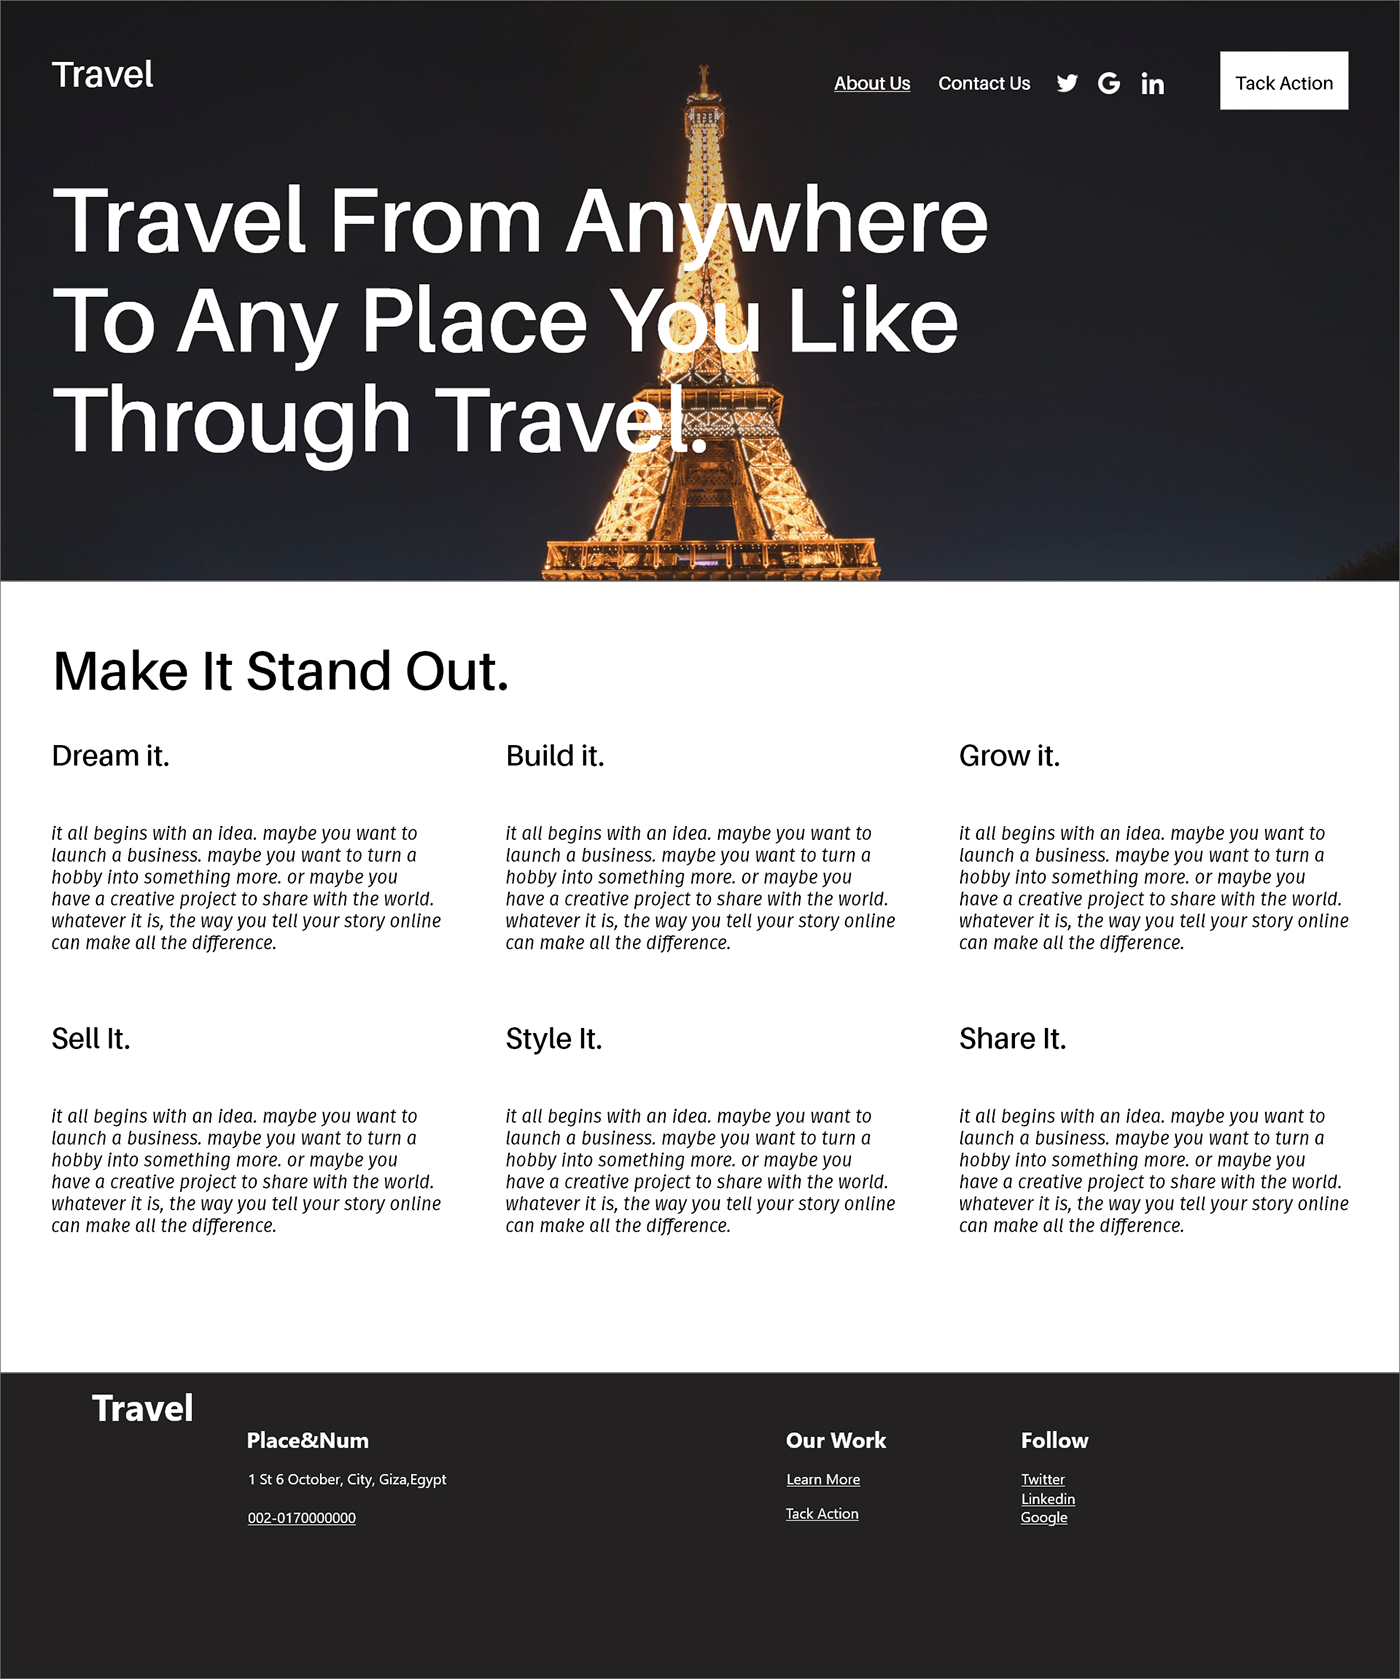 Travel android and web ui